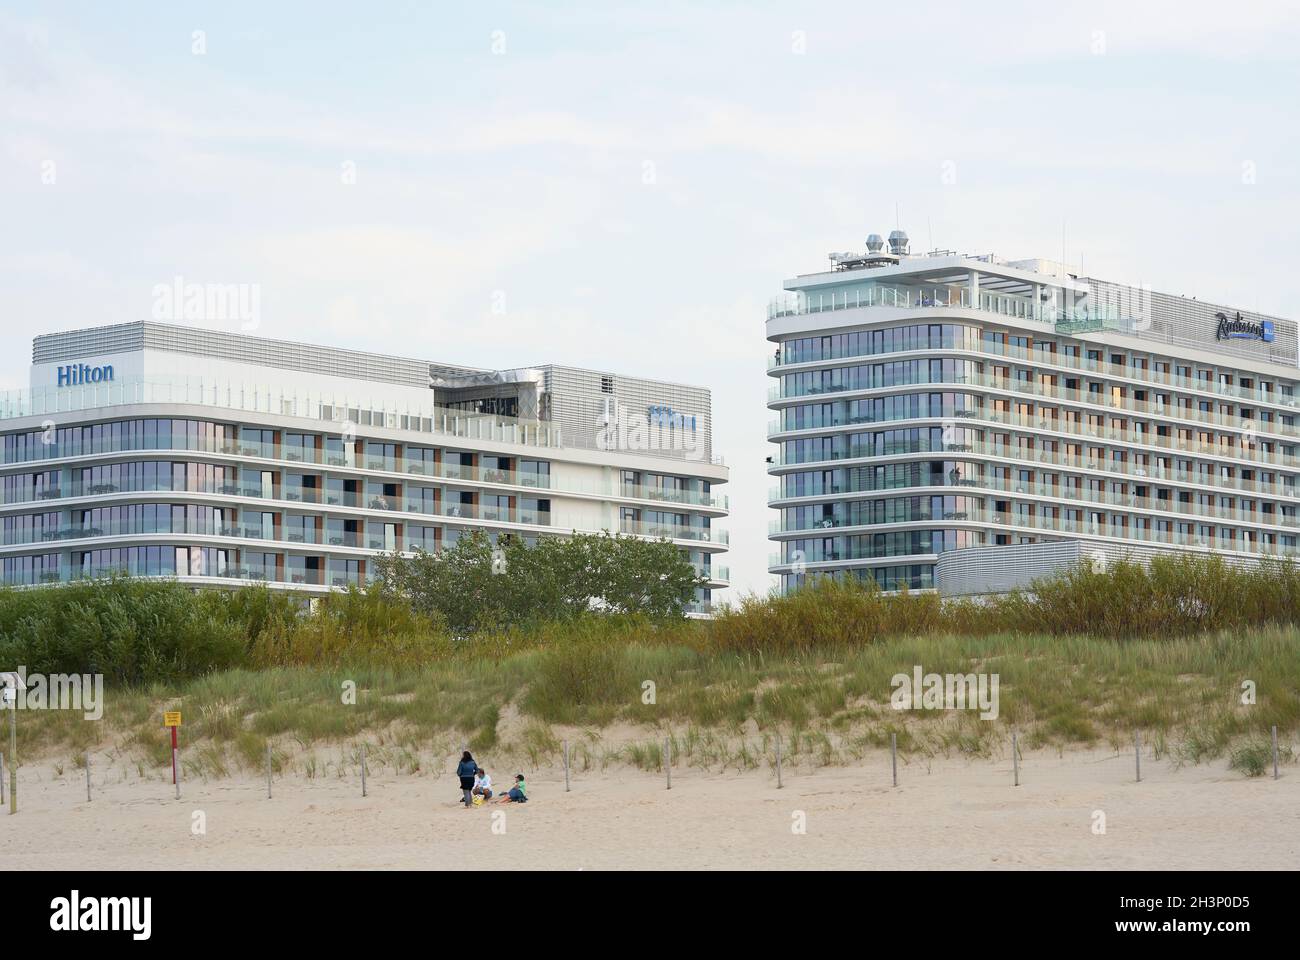 Hotels of the Hilton and Radisson hotel chains on the beach of Swinoujscie on the Polish Baltic Sea Stock Photo